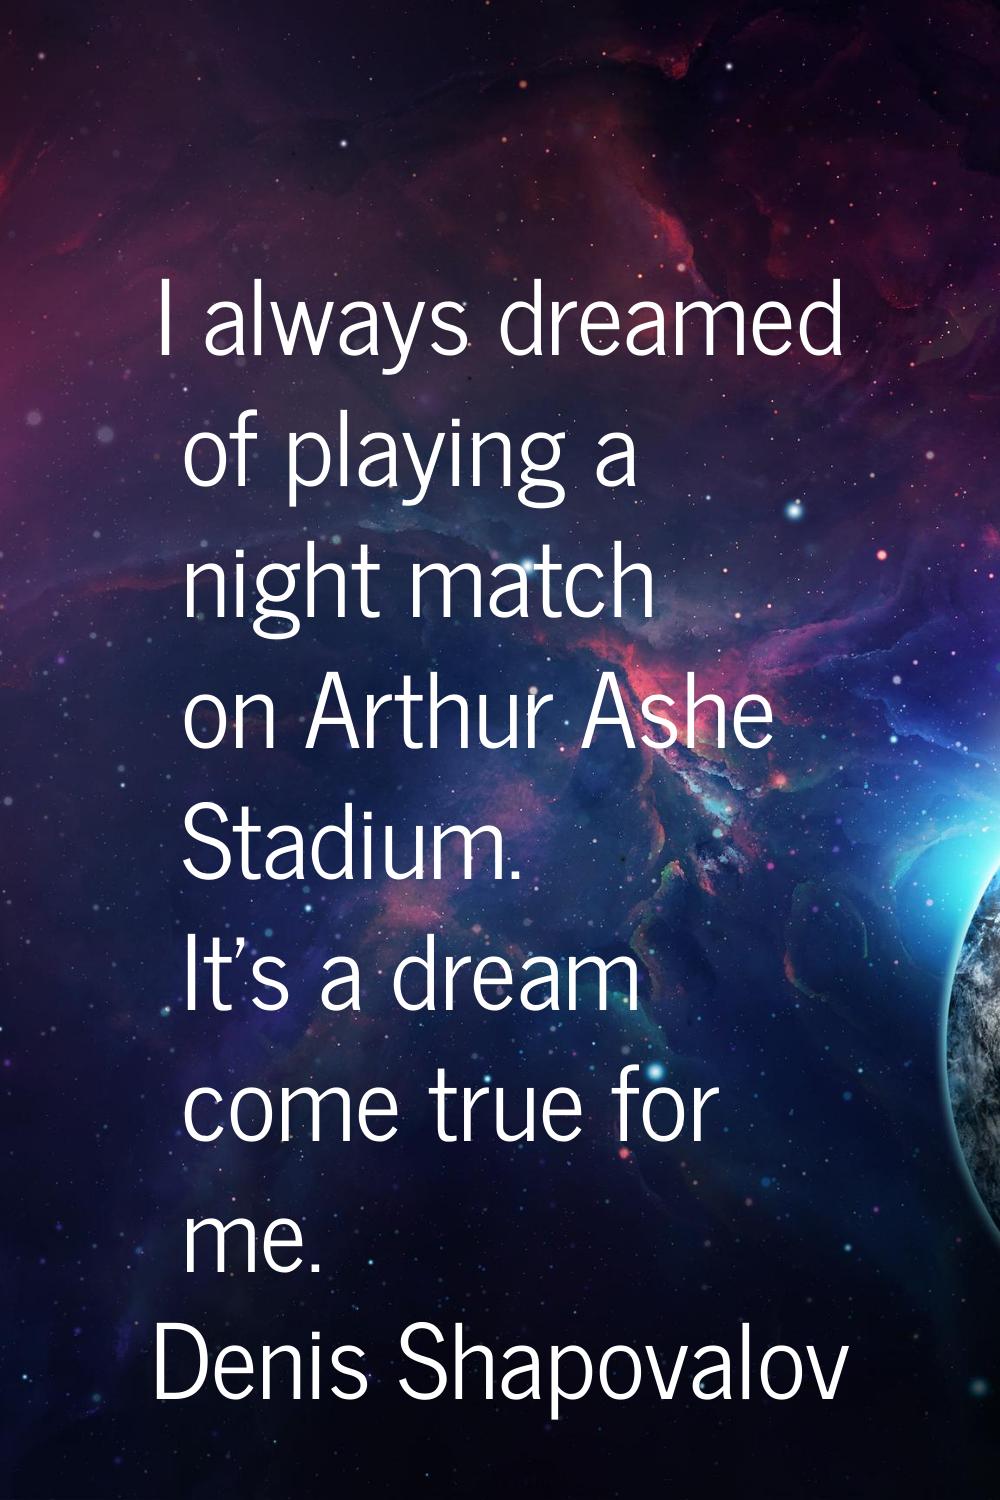 I always dreamed of playing a night match on Arthur Ashe Stadium. It's a dream come true for me.